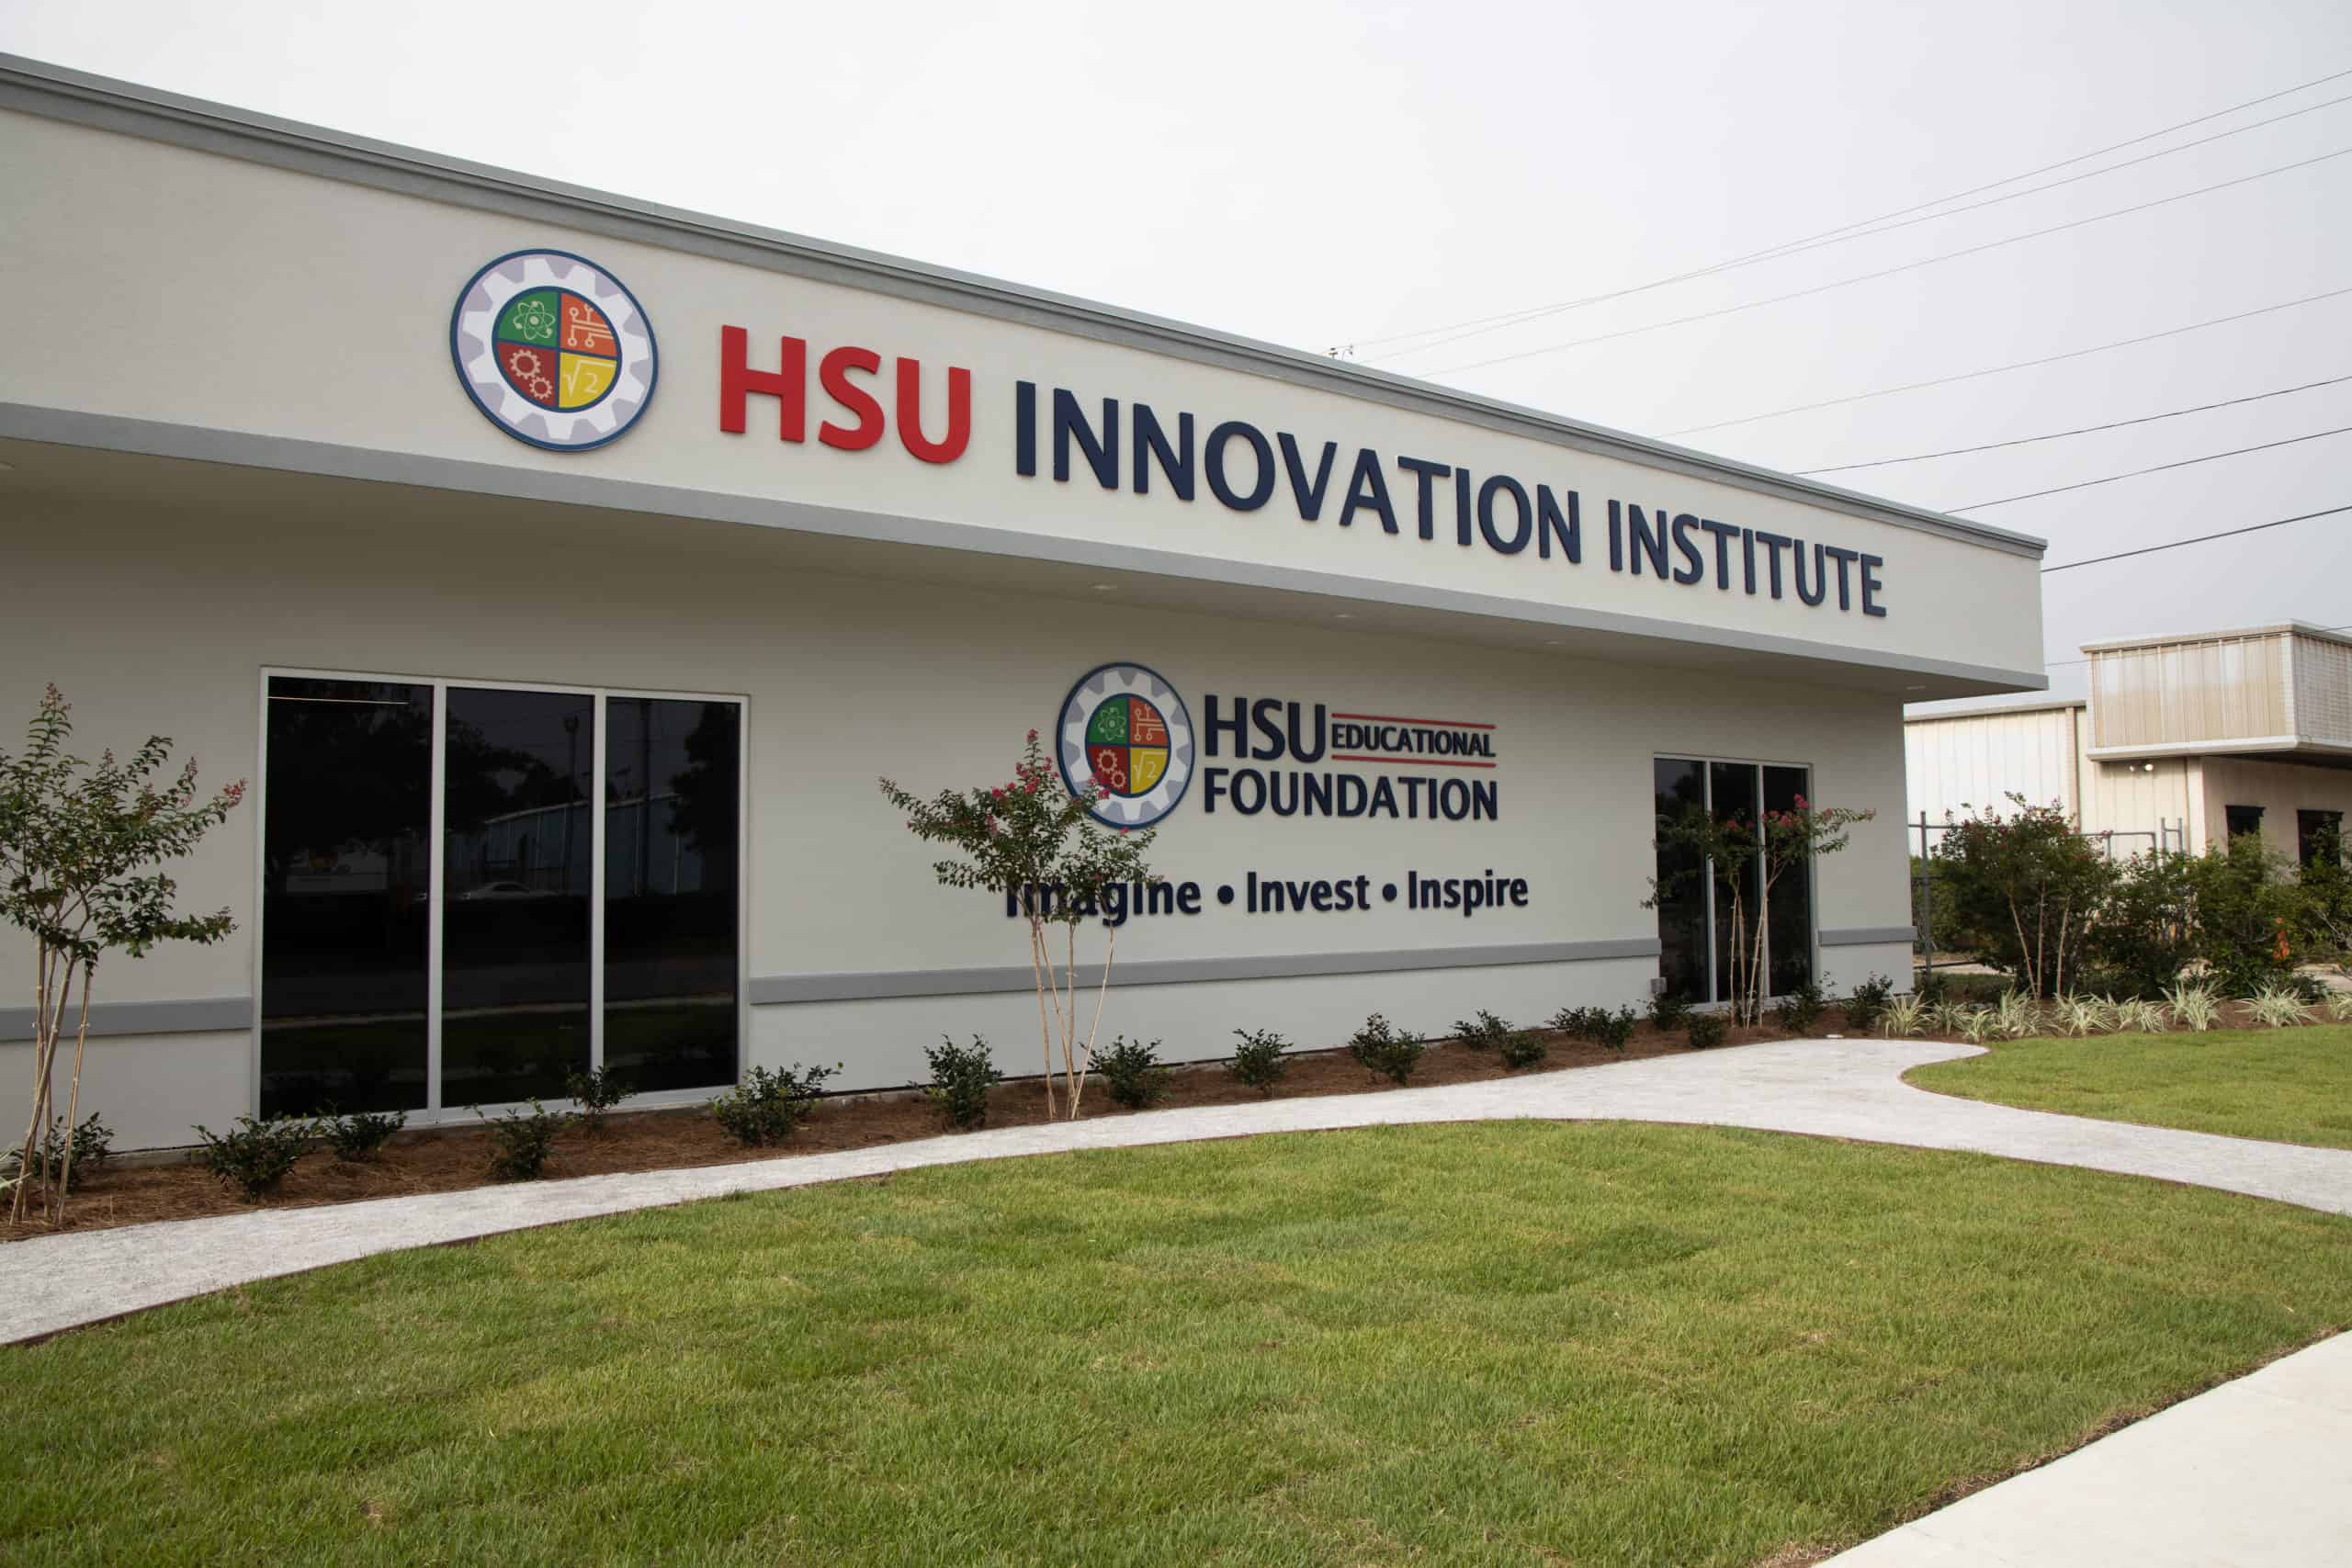 High-Tech Institute of Innovation unveiling photo